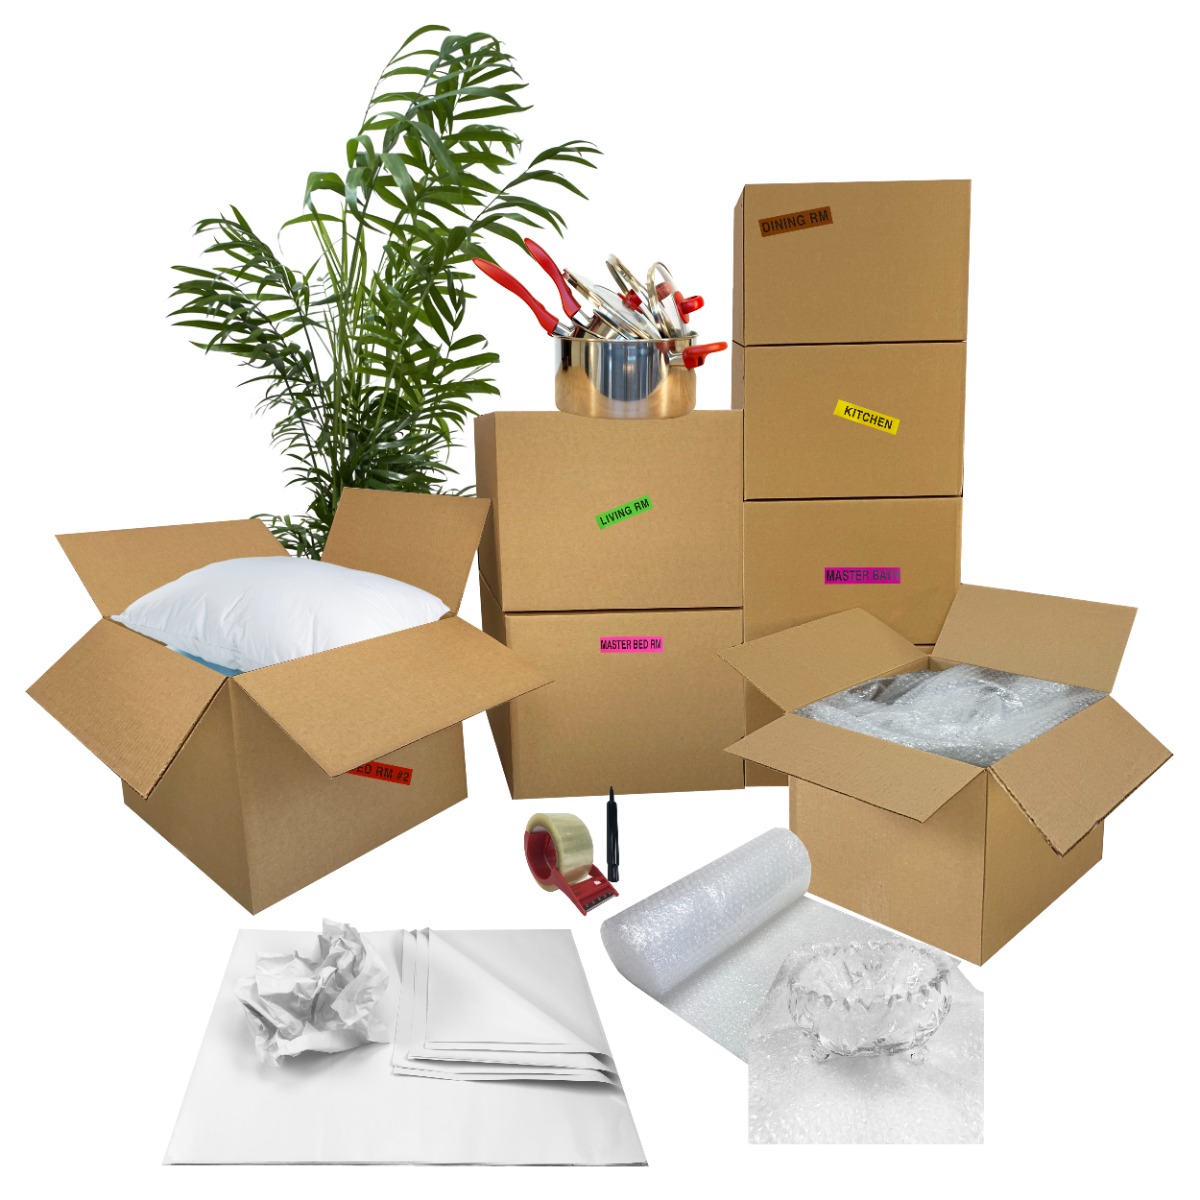 uBmove uBoxes Smart Moving Bigger Boxes (4 Room) 44 Moving boxes &amp; Packing supplies